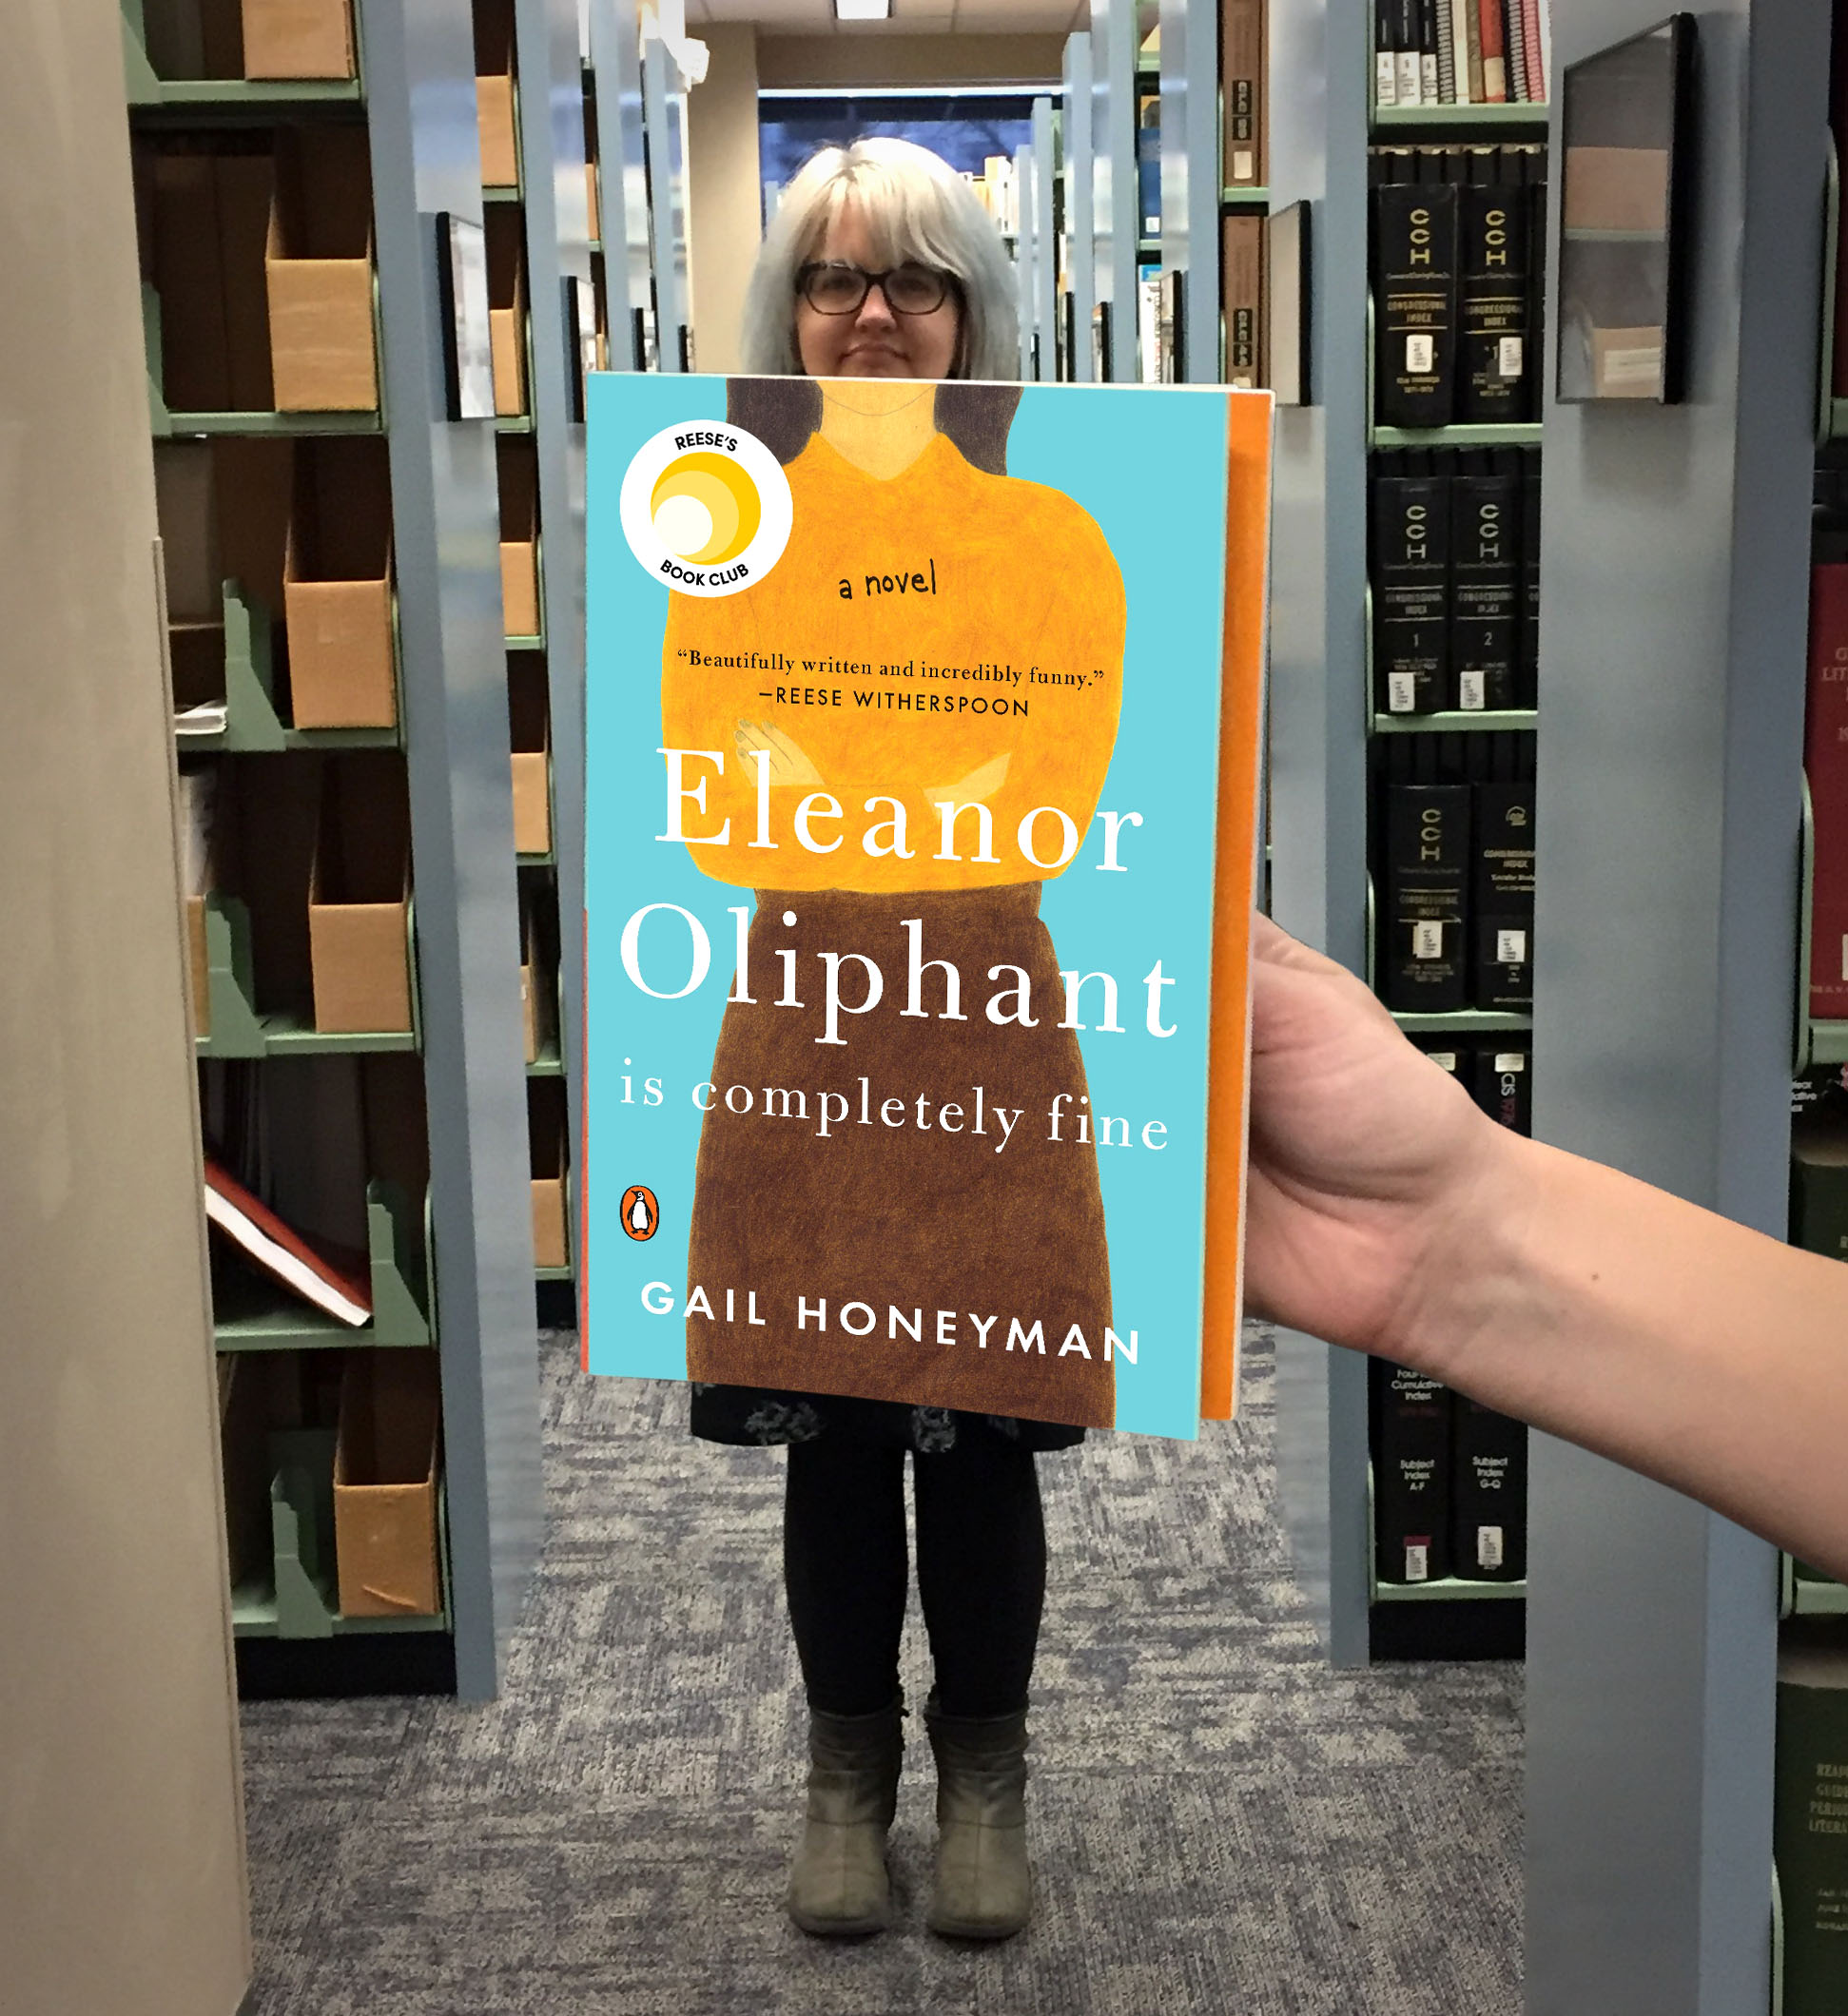 "Eleanor Oliphant is Completely Fine" by Gail Honeyman BookFace